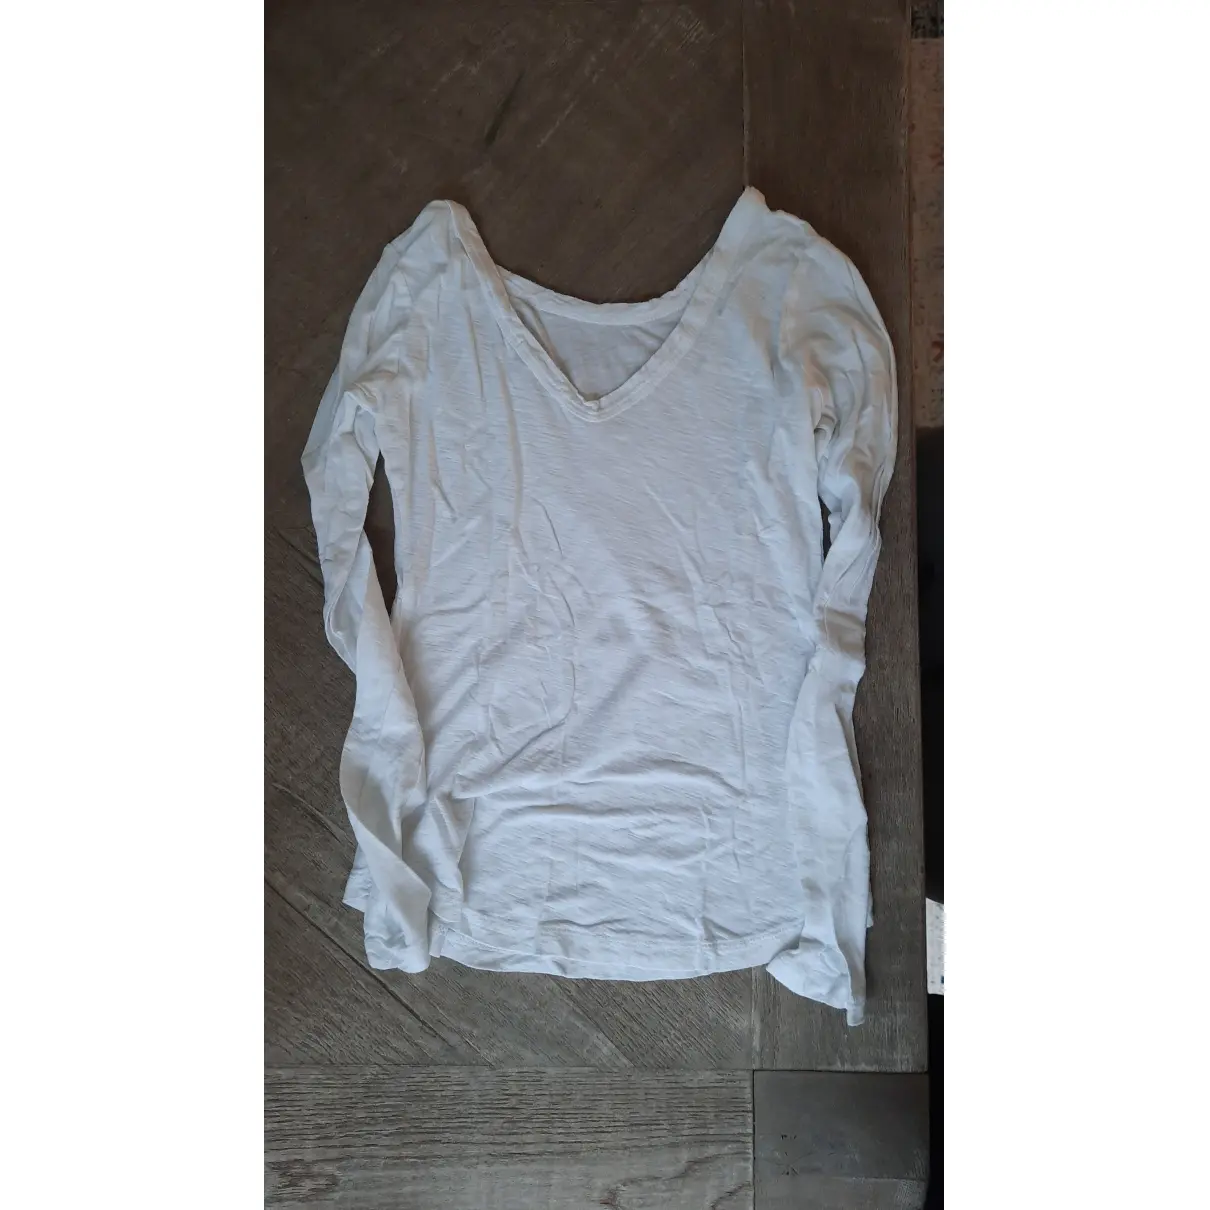 Buy James Perse White Cotton Top online